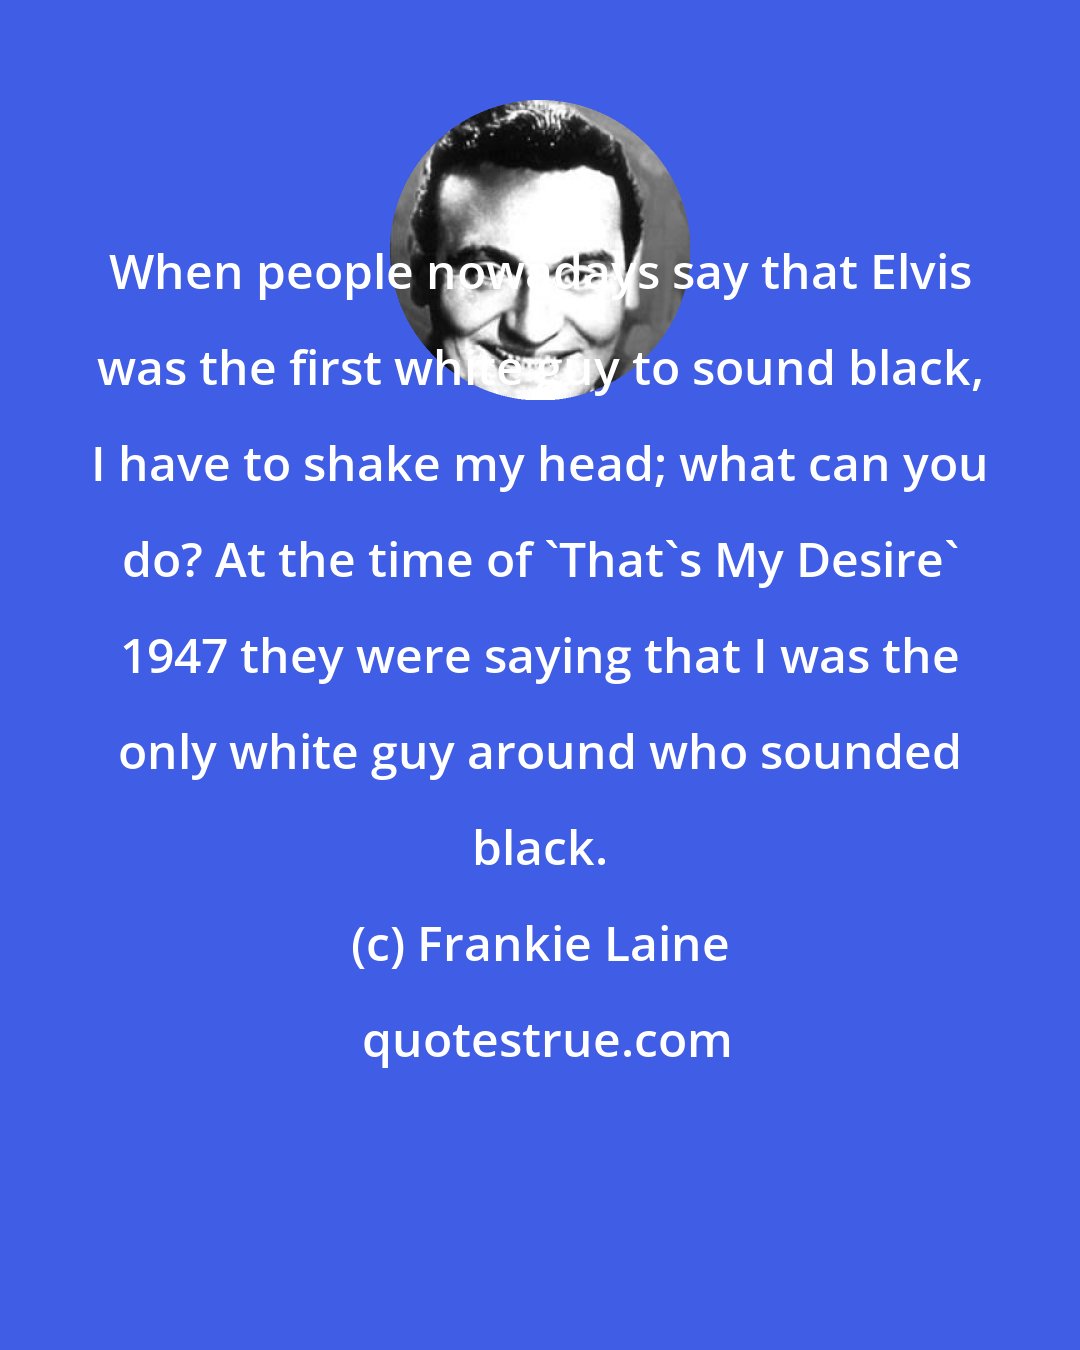 Frankie Laine: When people nowadays say that Elvis was the first white guy to sound black, I have to shake my head; what can you do? At the time of 'That's My Desire' 1947 they were saying that I was the only white guy around who sounded black.